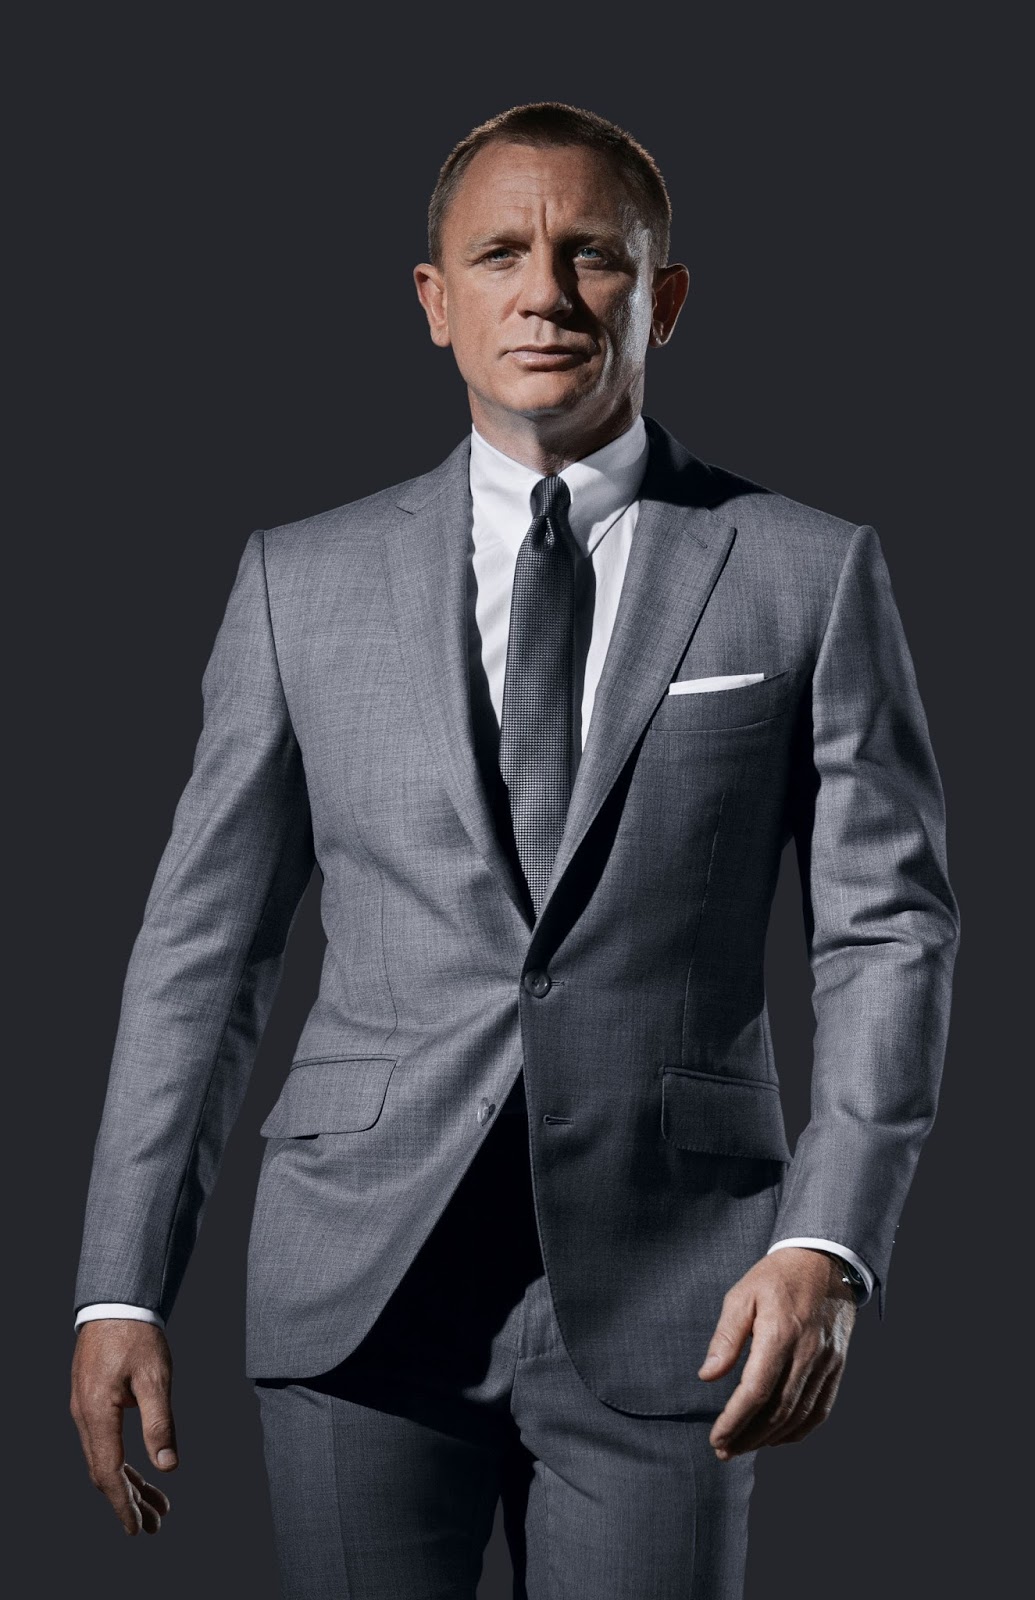 Fan Girl: The Anticipated Return of 007